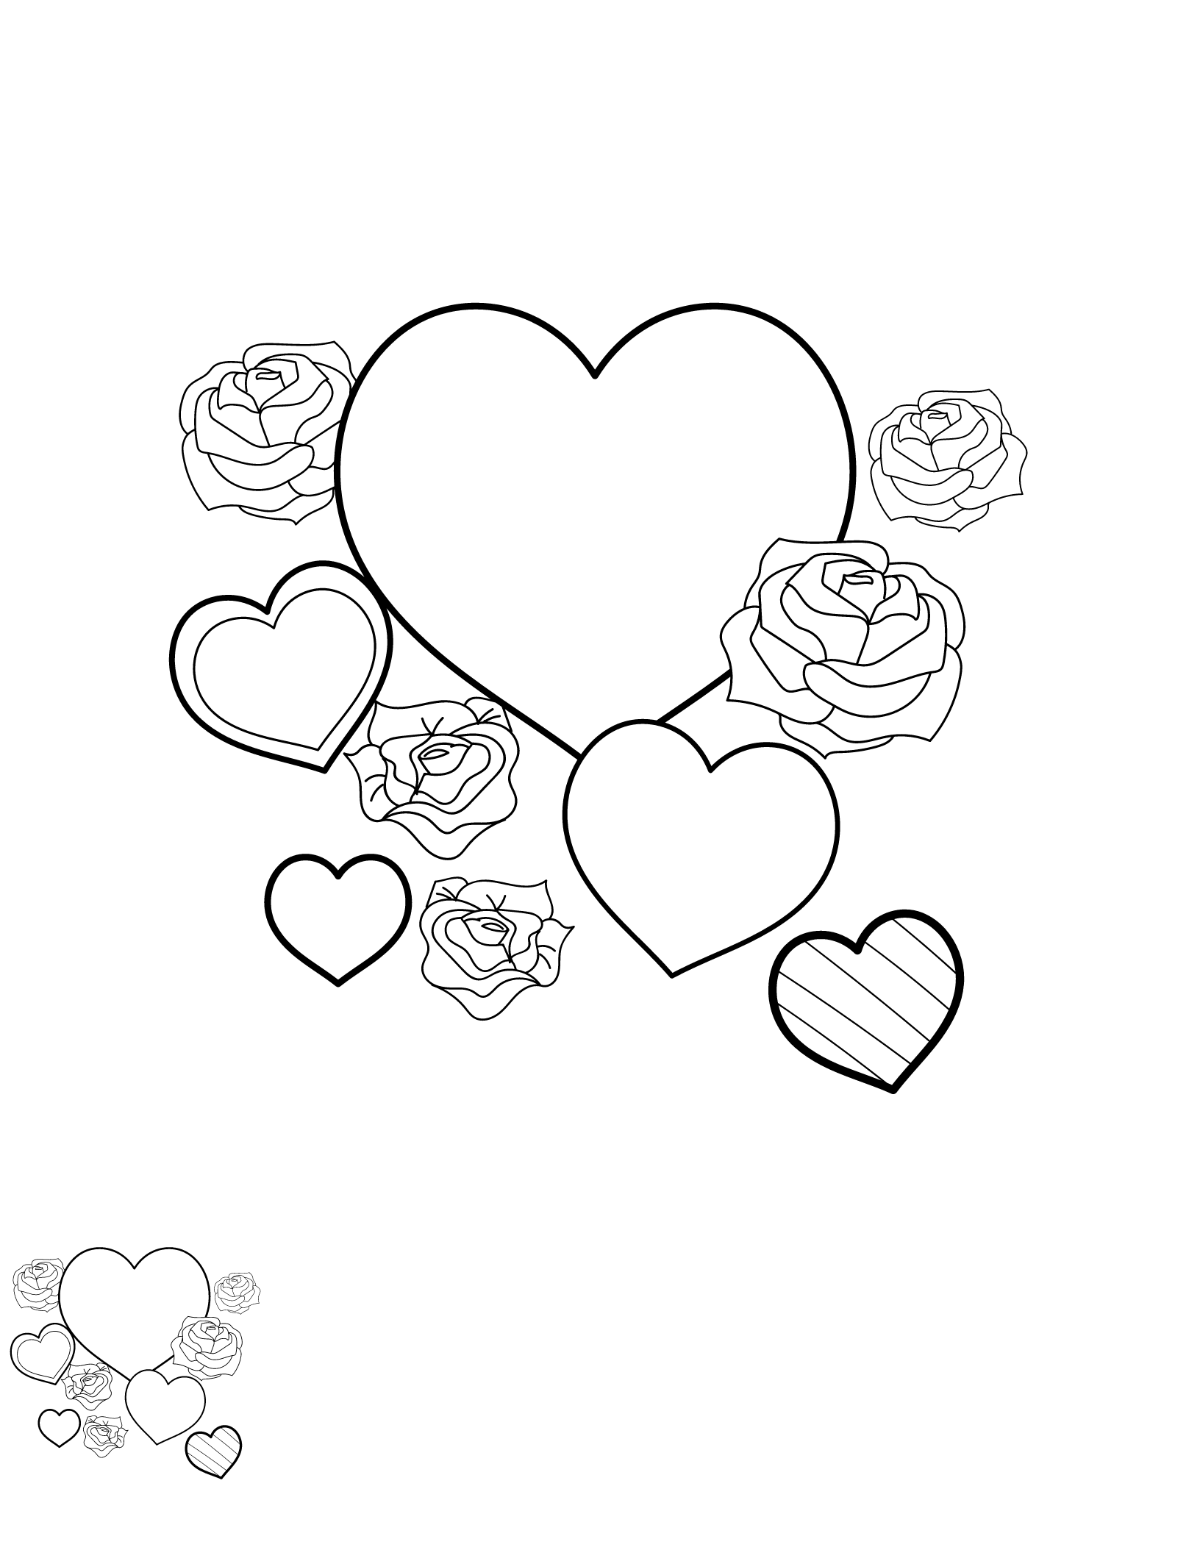 Heart and Rose Bouquet Coloring Page Template